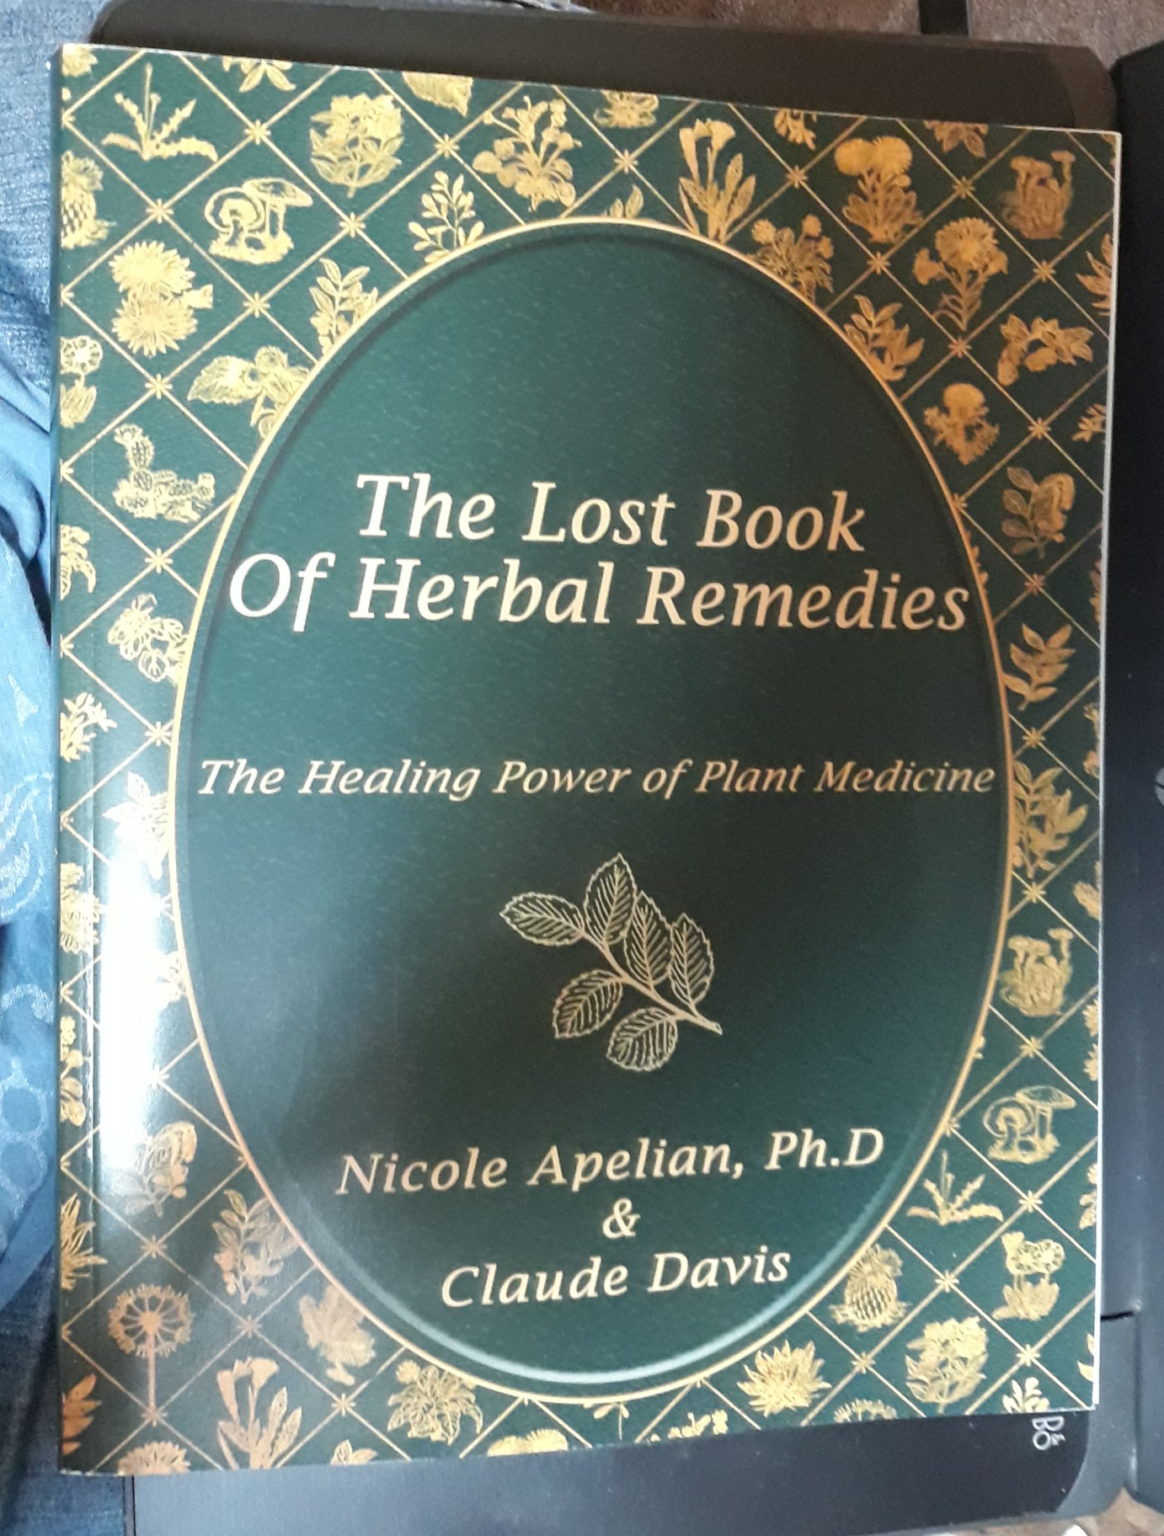 The Lost Book of Herbal Remedies — Patchwork Times by Judy Laquidara